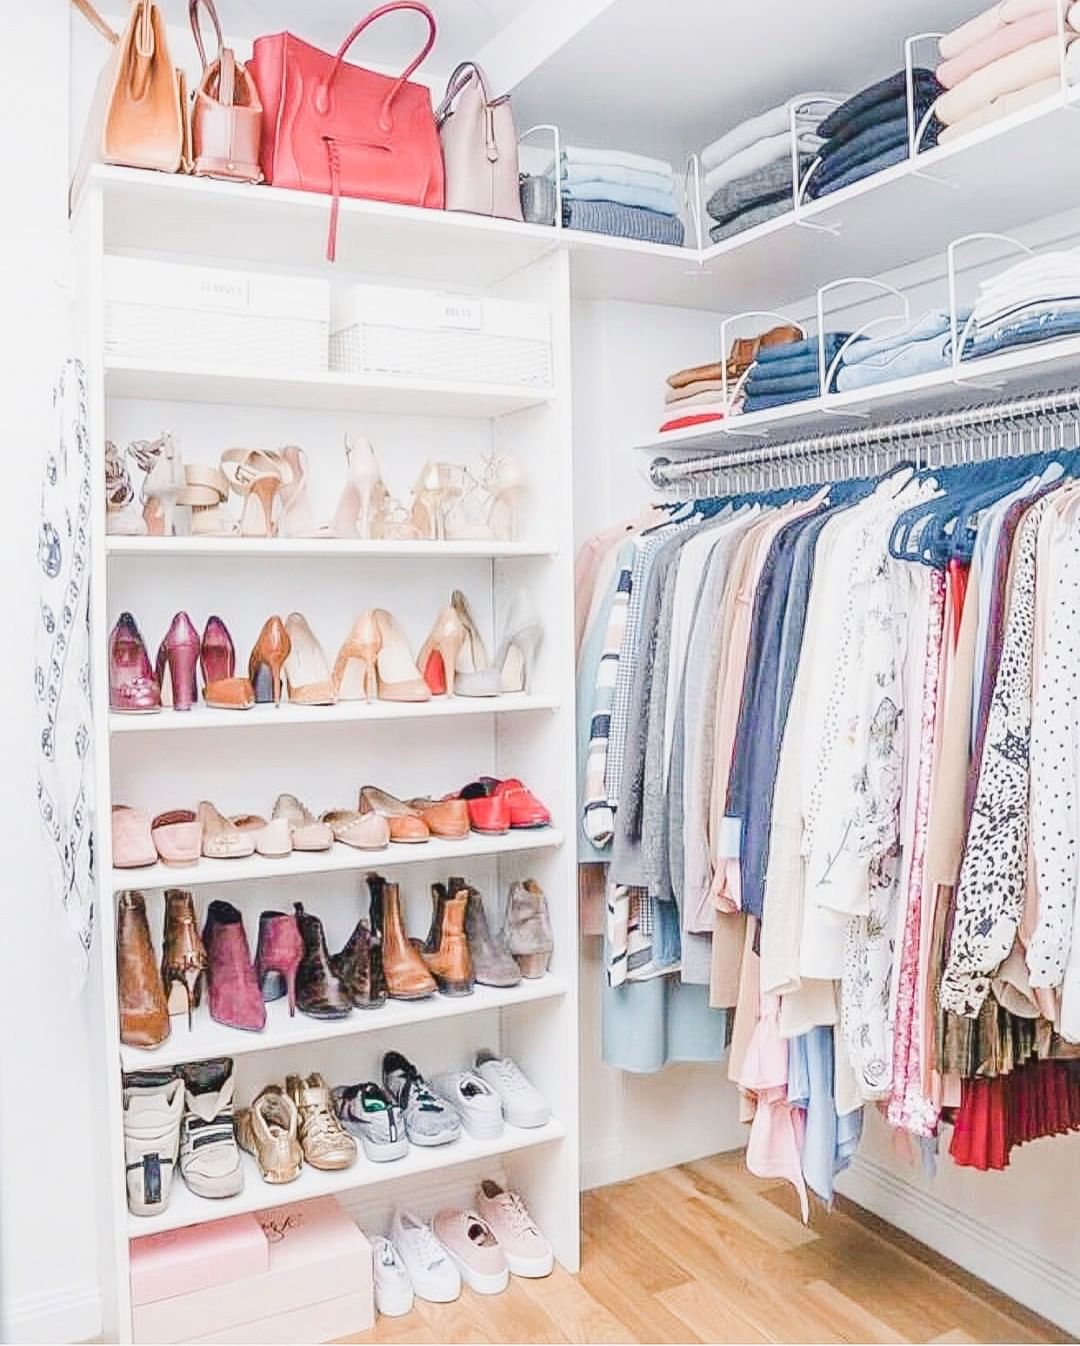 Organized closet with women's clothes and shoes. Photo by Instagram user @simplysamorganized